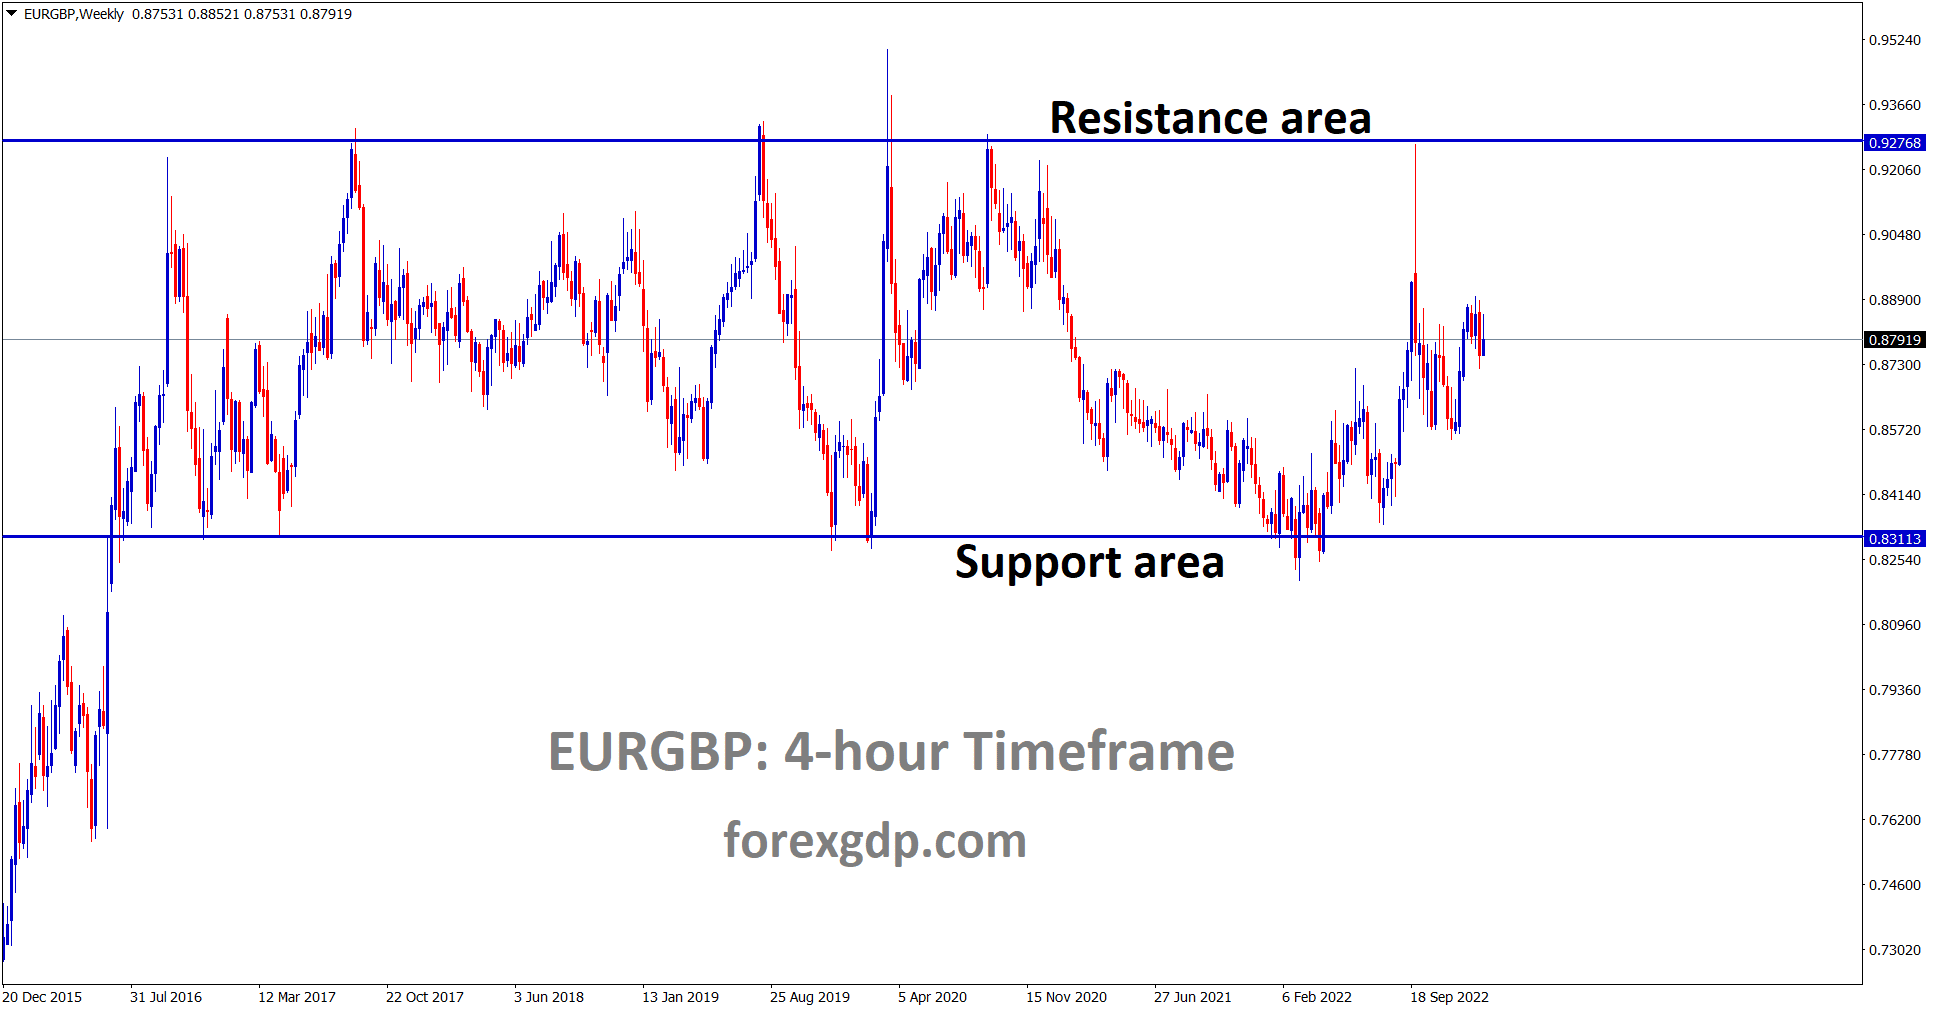 EURGBP is moving in a box pattern and the market has rebounded from the support area of the pattern